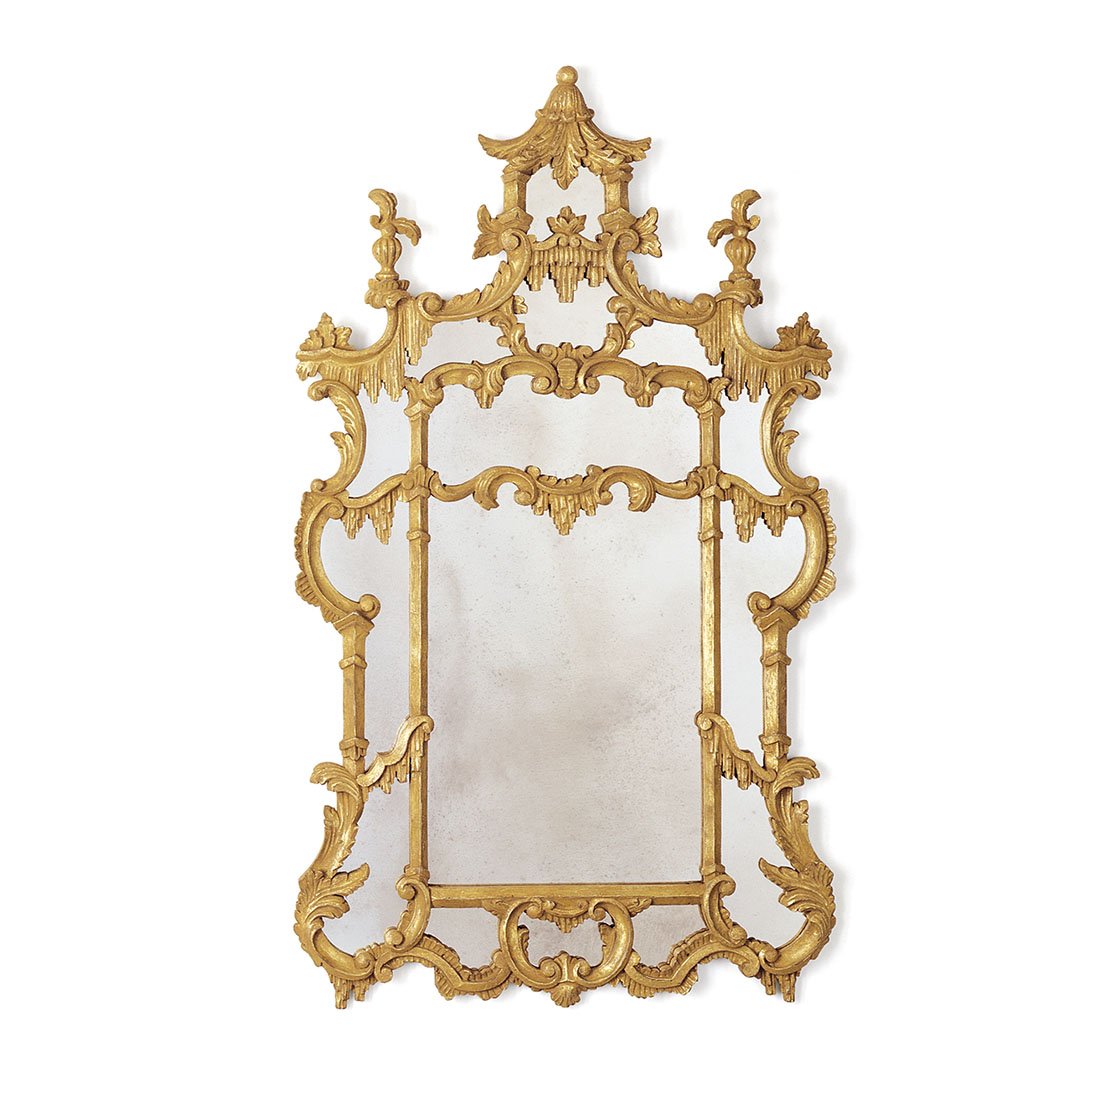 Chinoiserie mirror in Burnt Gold - Beaumont & Fletcher